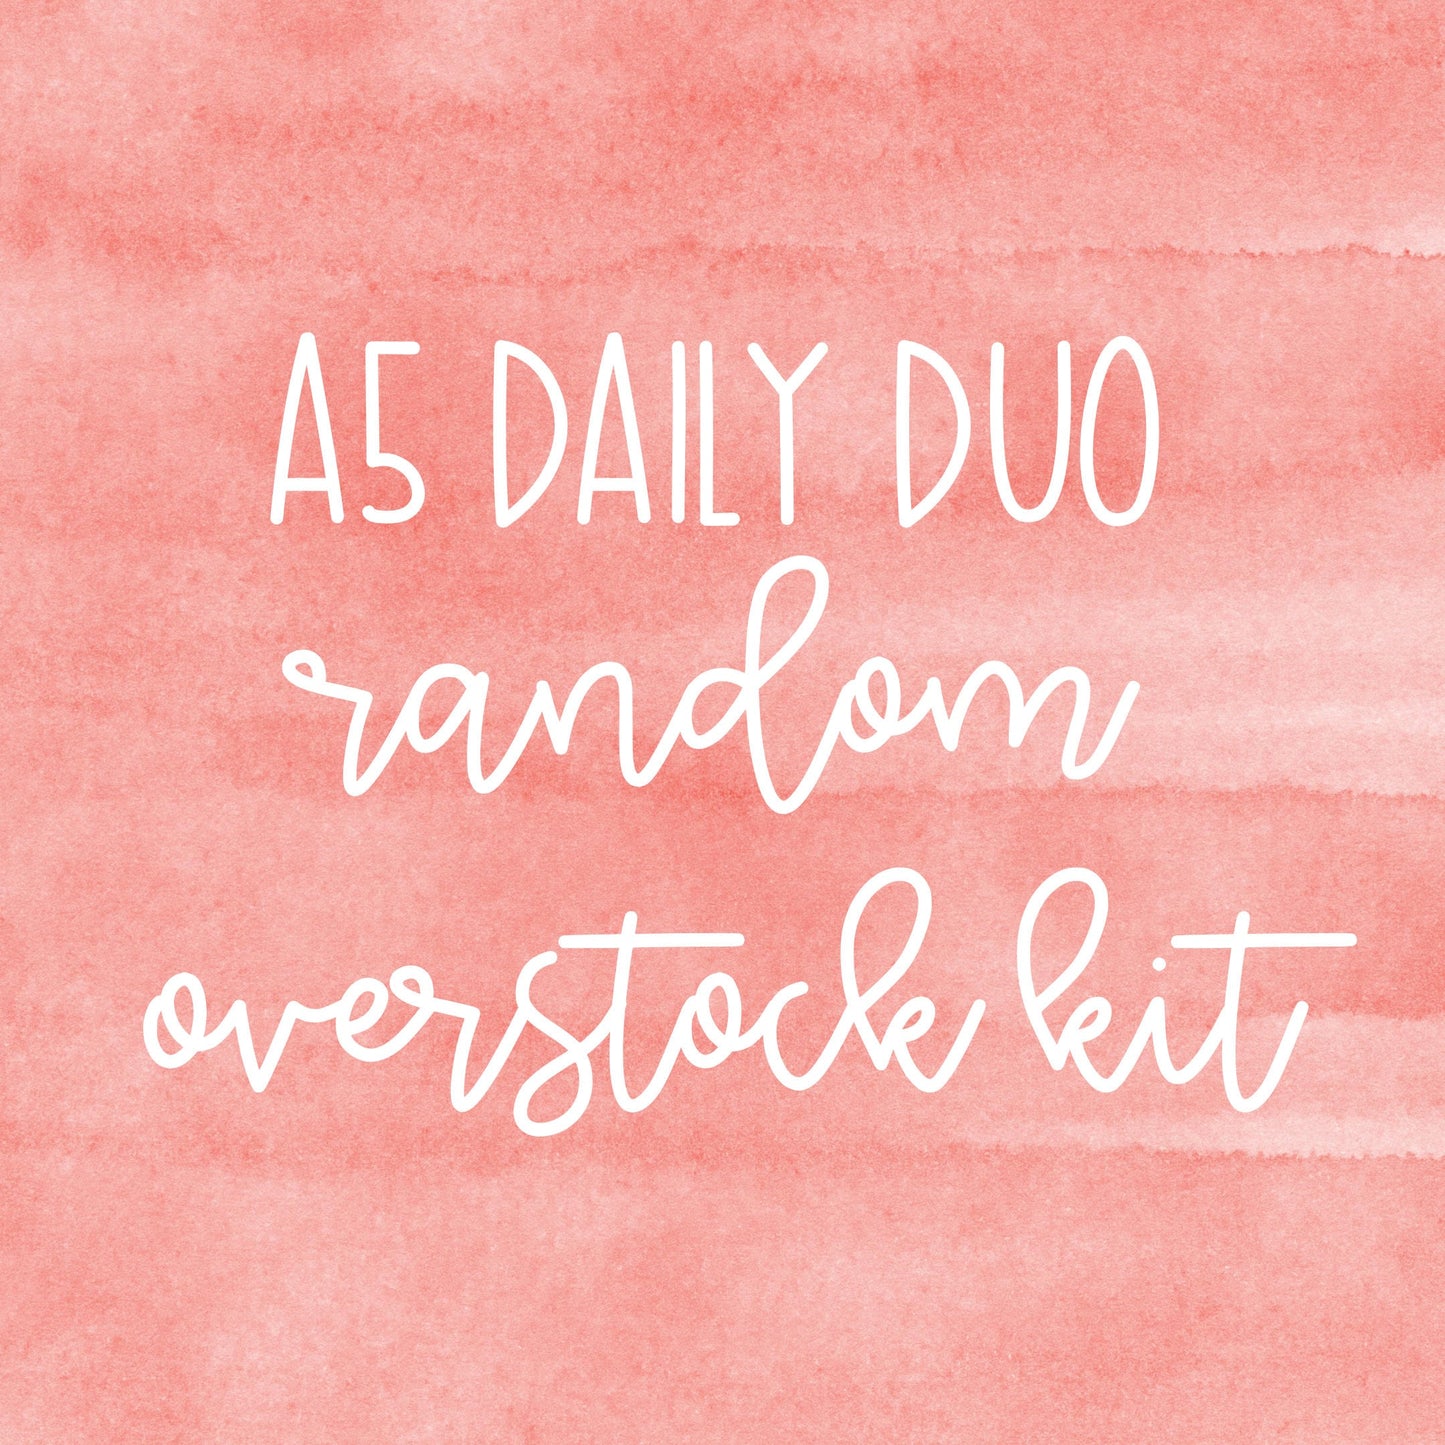 A5 Daily Duo Random Overstock Kit